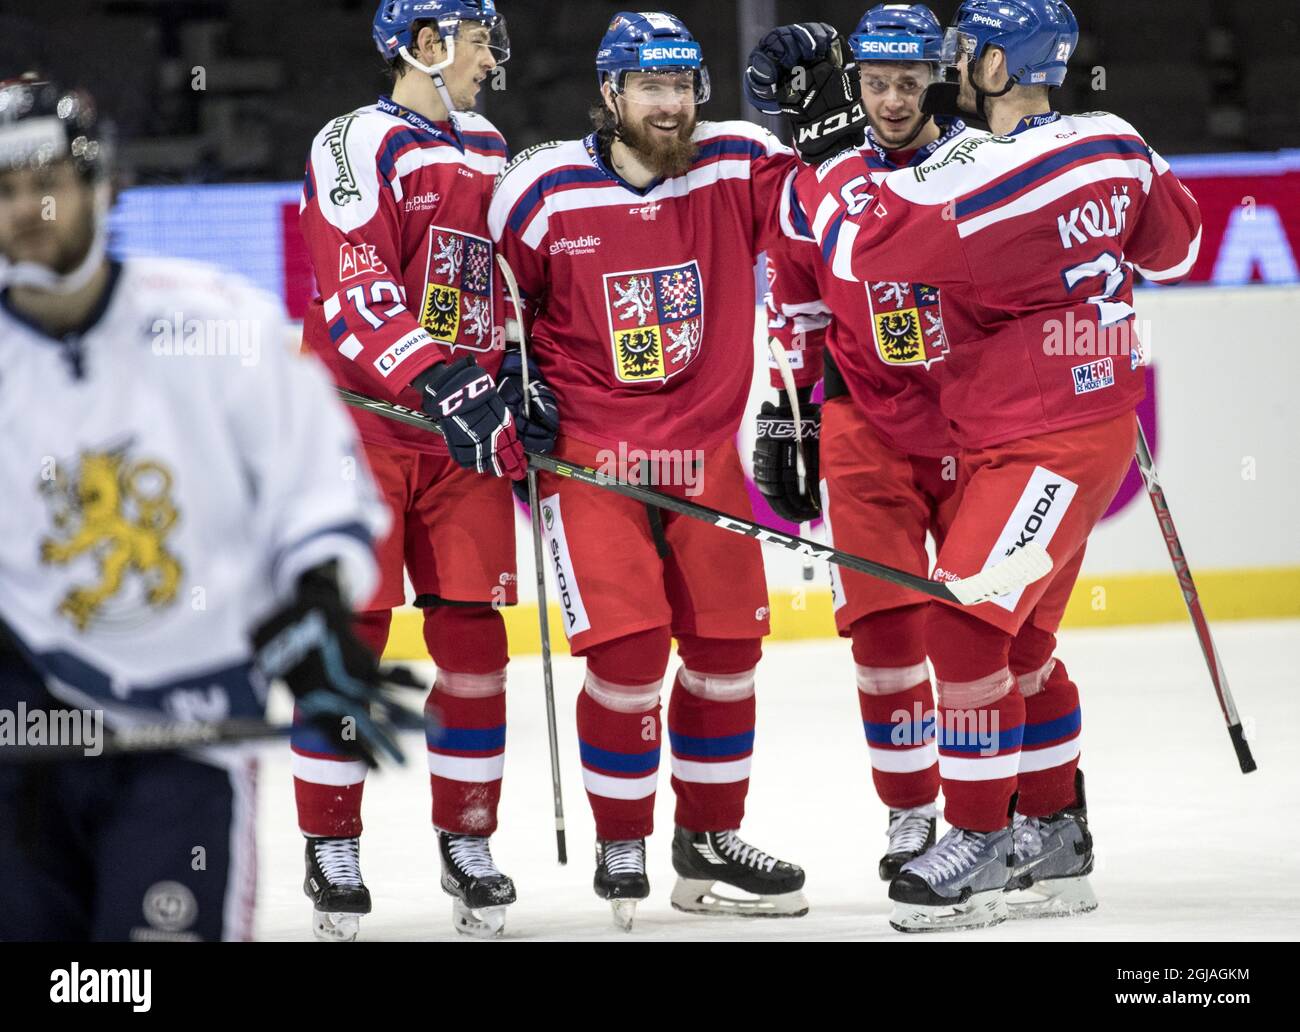 GOTEBORG 2017-02-11 Lukas Kaspar of the Czech Rep (2nd L) cheers after scoring the 4-0 goal in the Finland vs the Czech Republic ice hockey match in the Sweden Hockey Games in